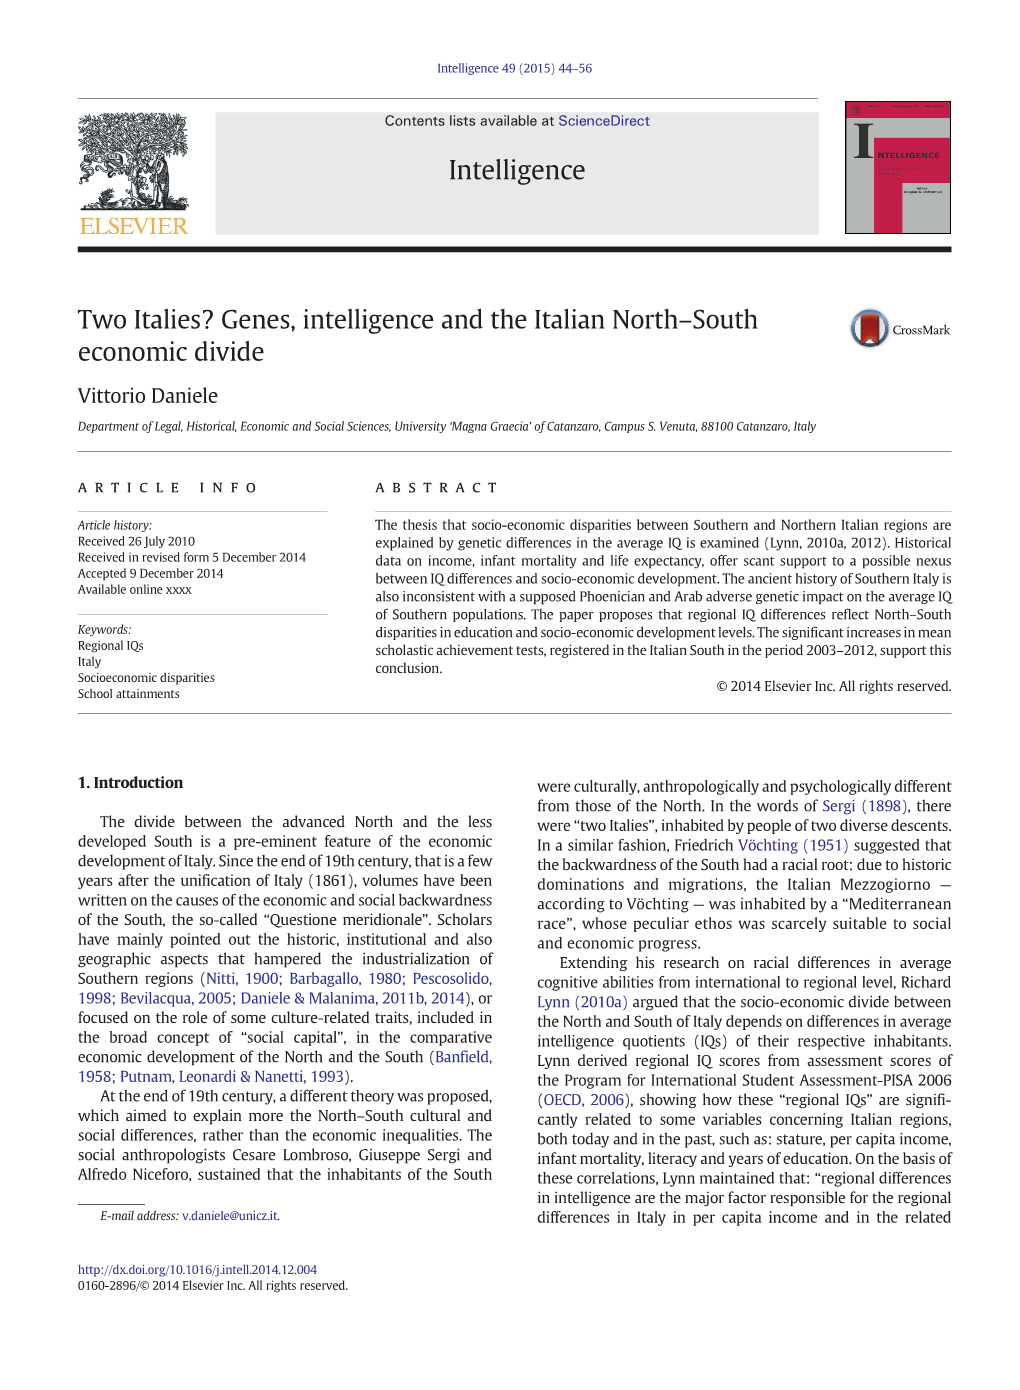 Two Italies? Genes, Intelligence and the Italian North–South Economic Divide